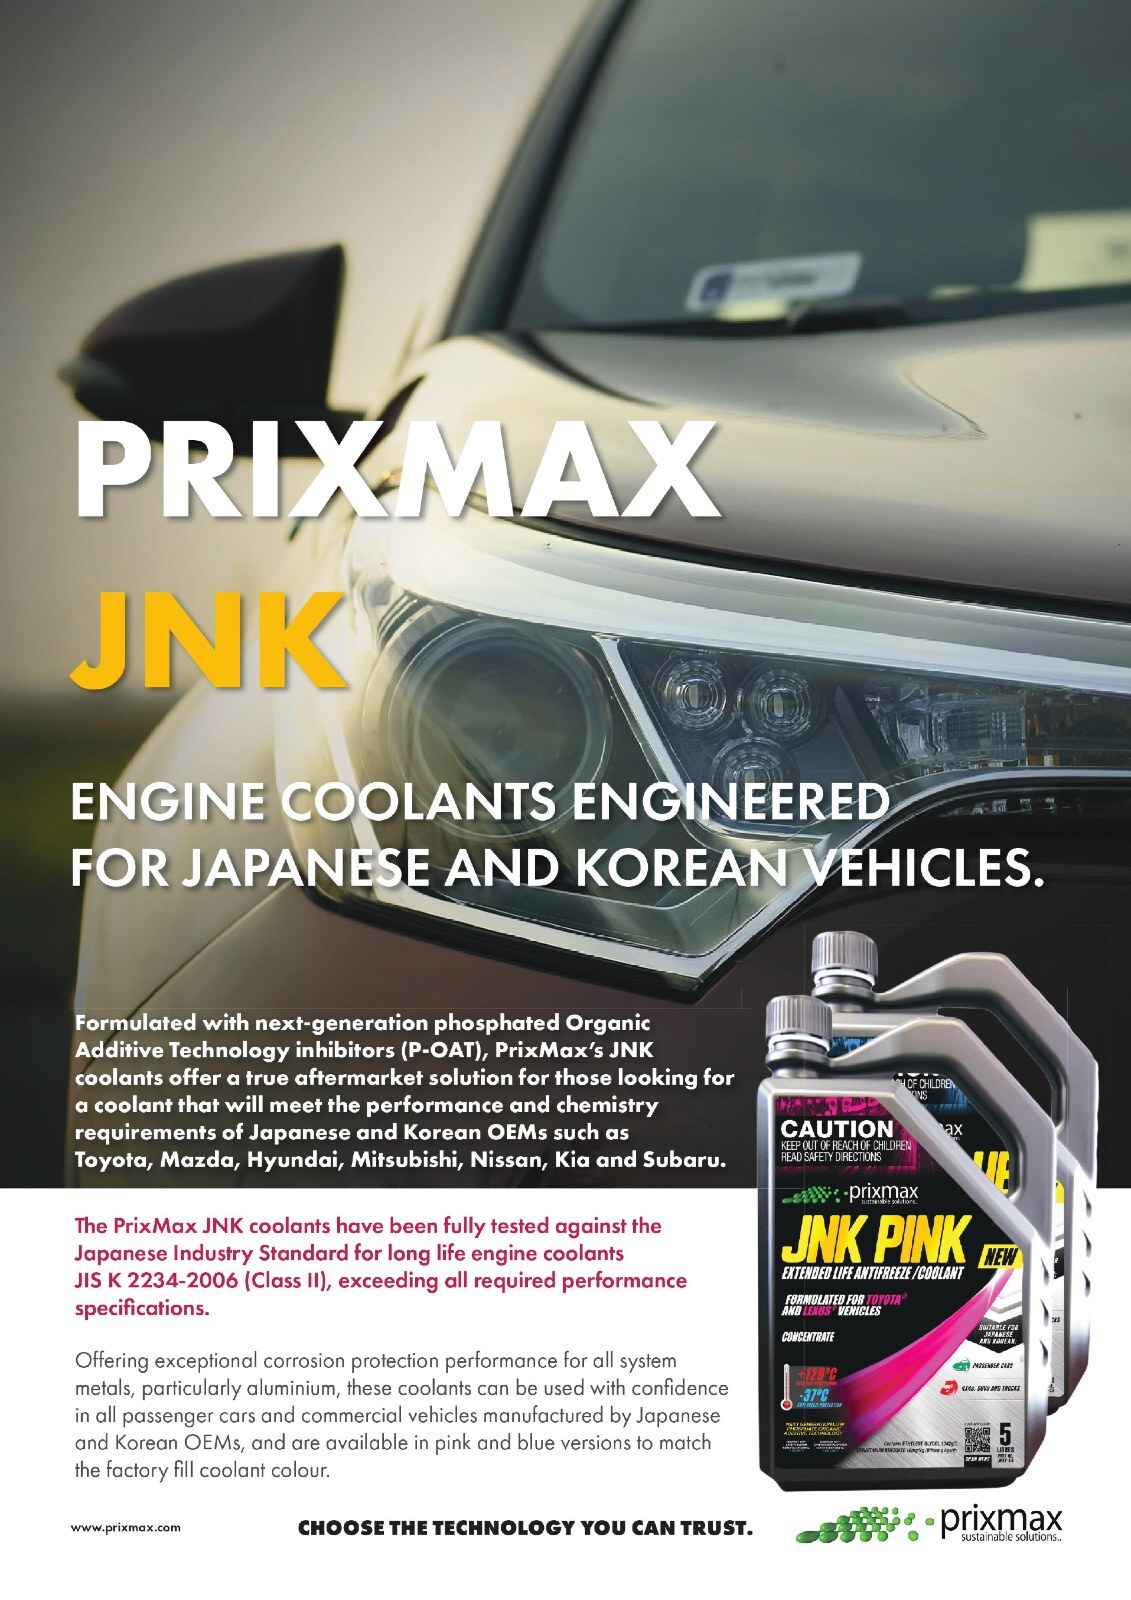 PrixMax JNK Pink Extended Life Antifreeze Antiboil Concentrate For Toyota & Lexus 5L